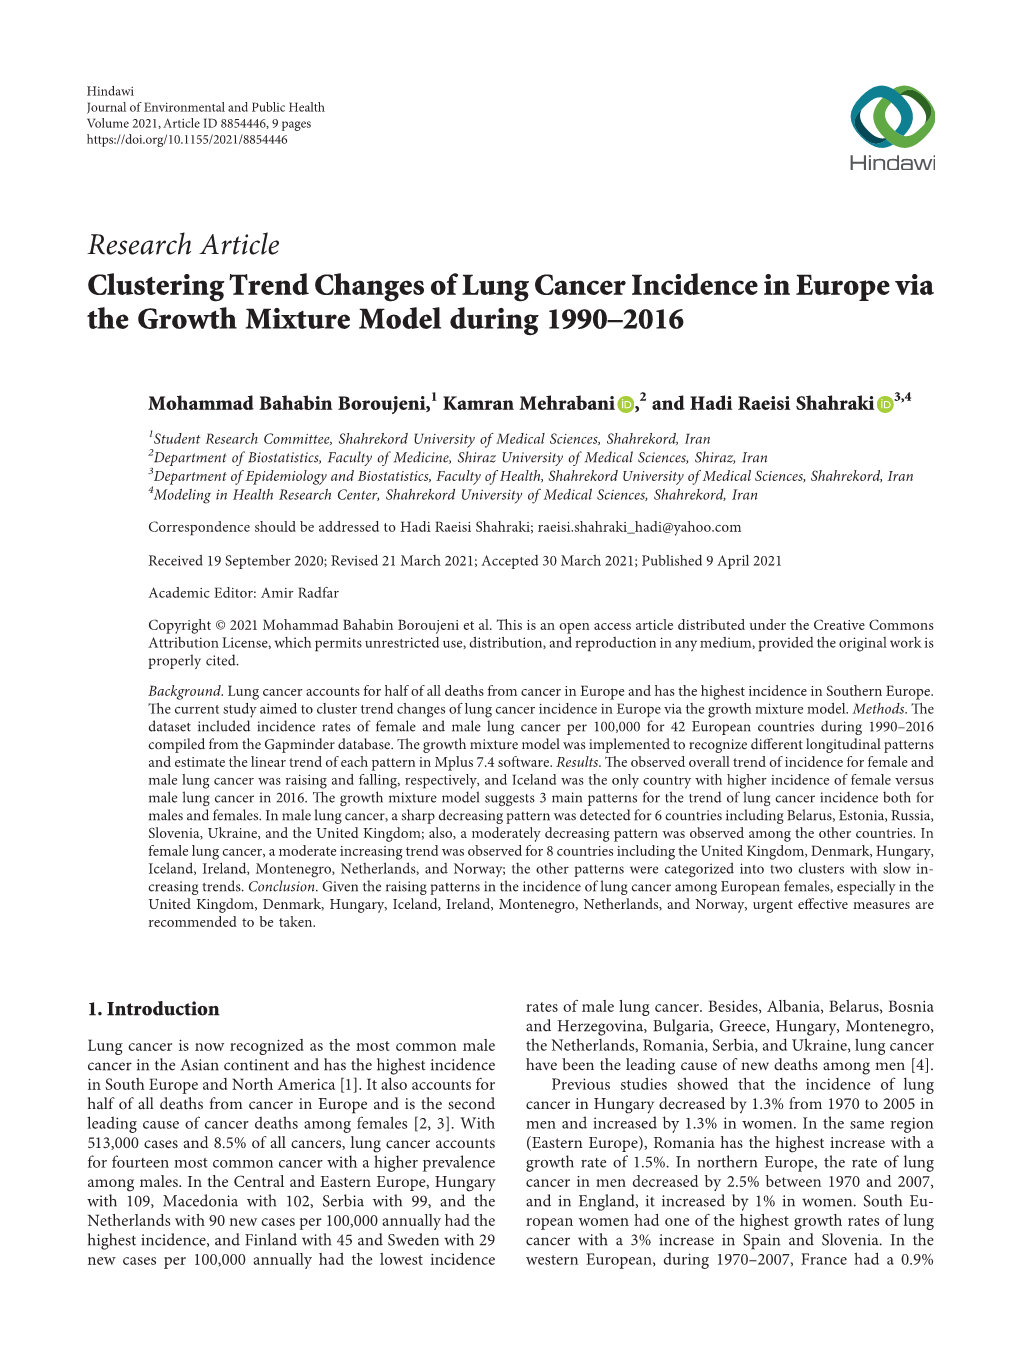 Clustering Trend Changes of Lung Cancer Incidence in Europe Via the Growth Mixture Model During 1990–2016